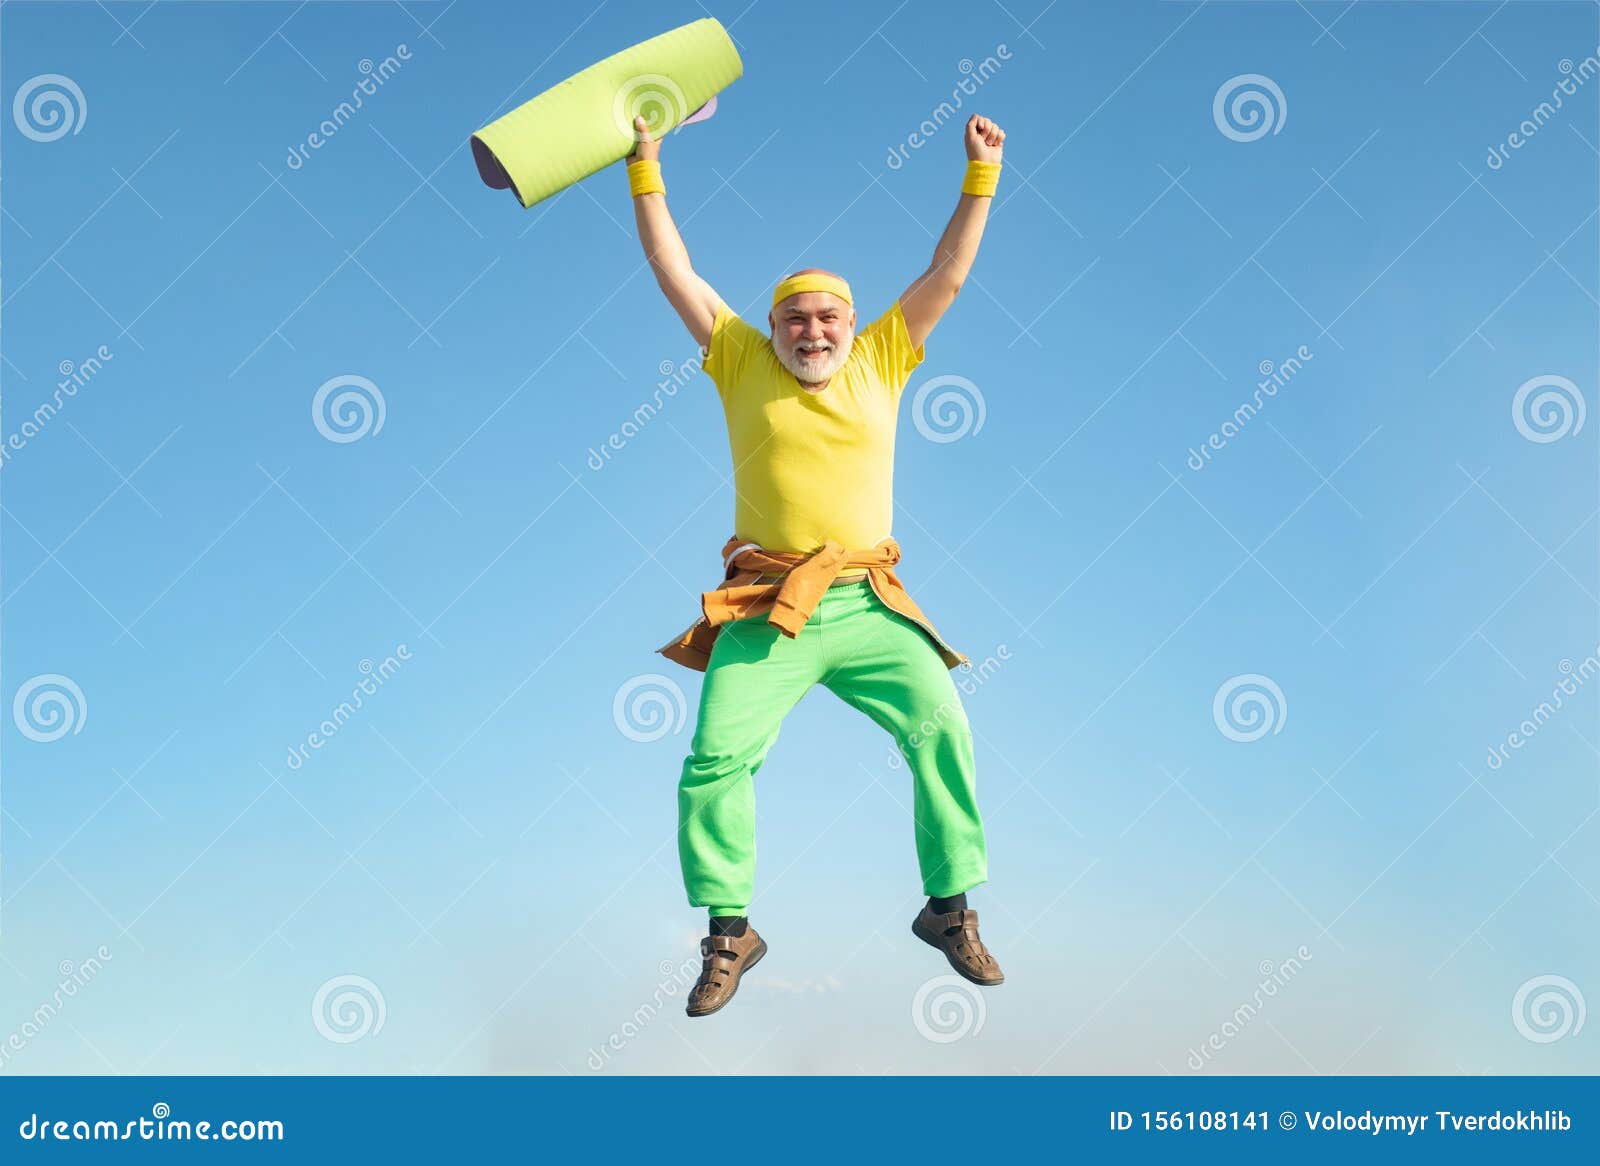 Freedom Retirement Concept. Old Man Jumping on Blue Sky Background. Funny  Senior Man Jumping. Stock Image - Image of aged, active: 156108141